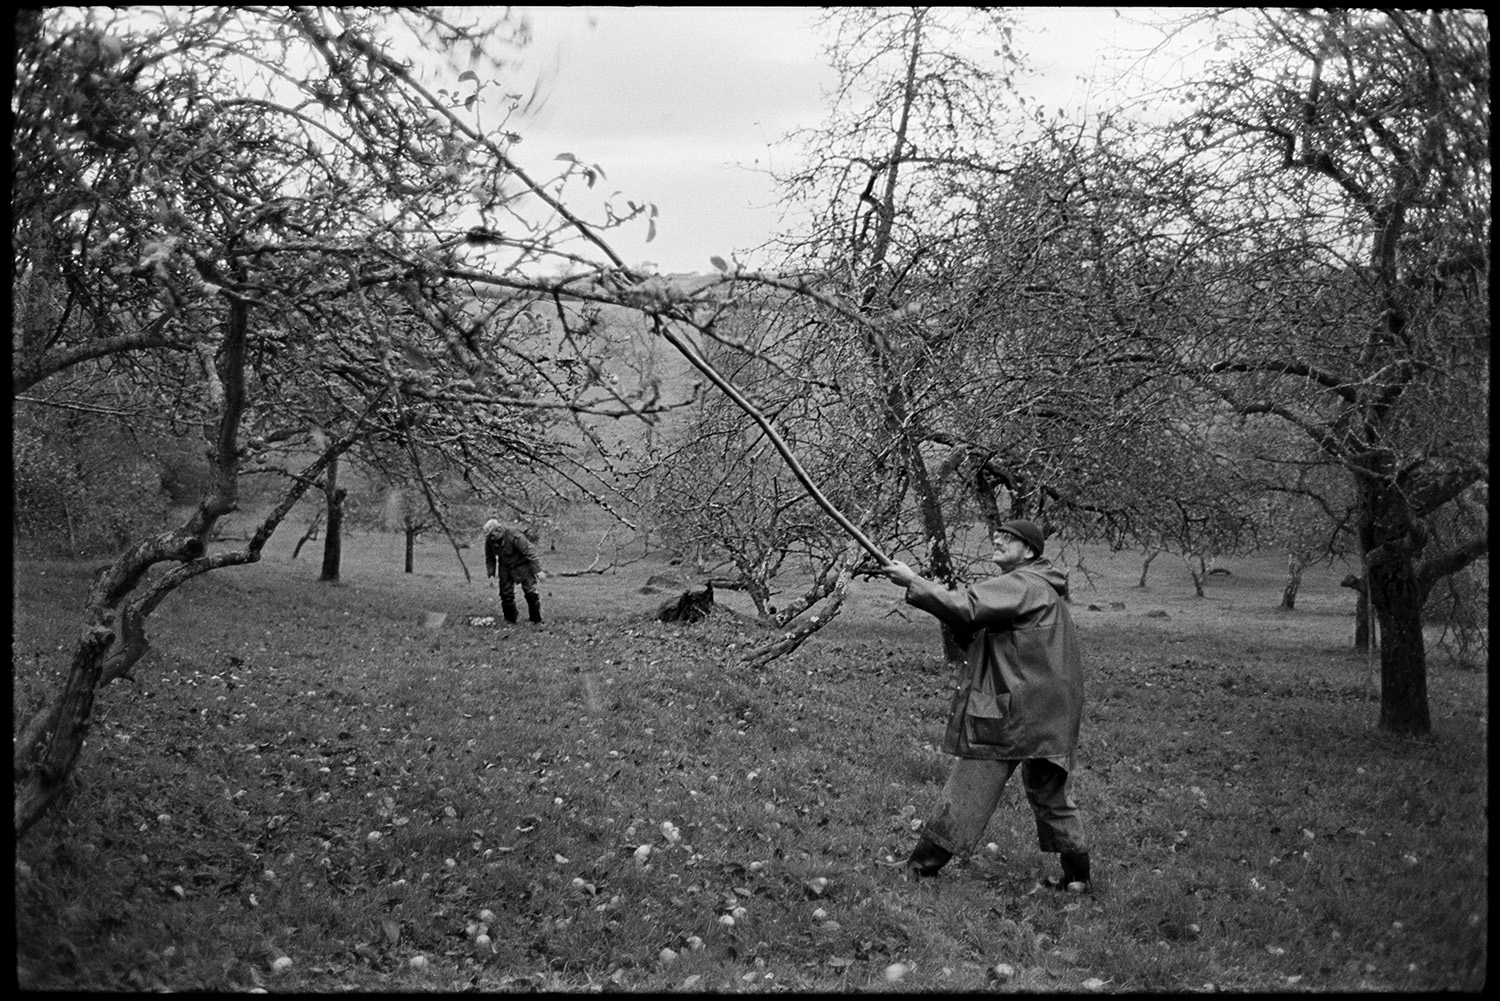 Cider orchard, man shaking apples from trees and bagging them up.
[A man shaking apples from tree branches in a cider orchard at Westpark, Iddesleigh. In the orchard another man is picking up the fallen apples.]